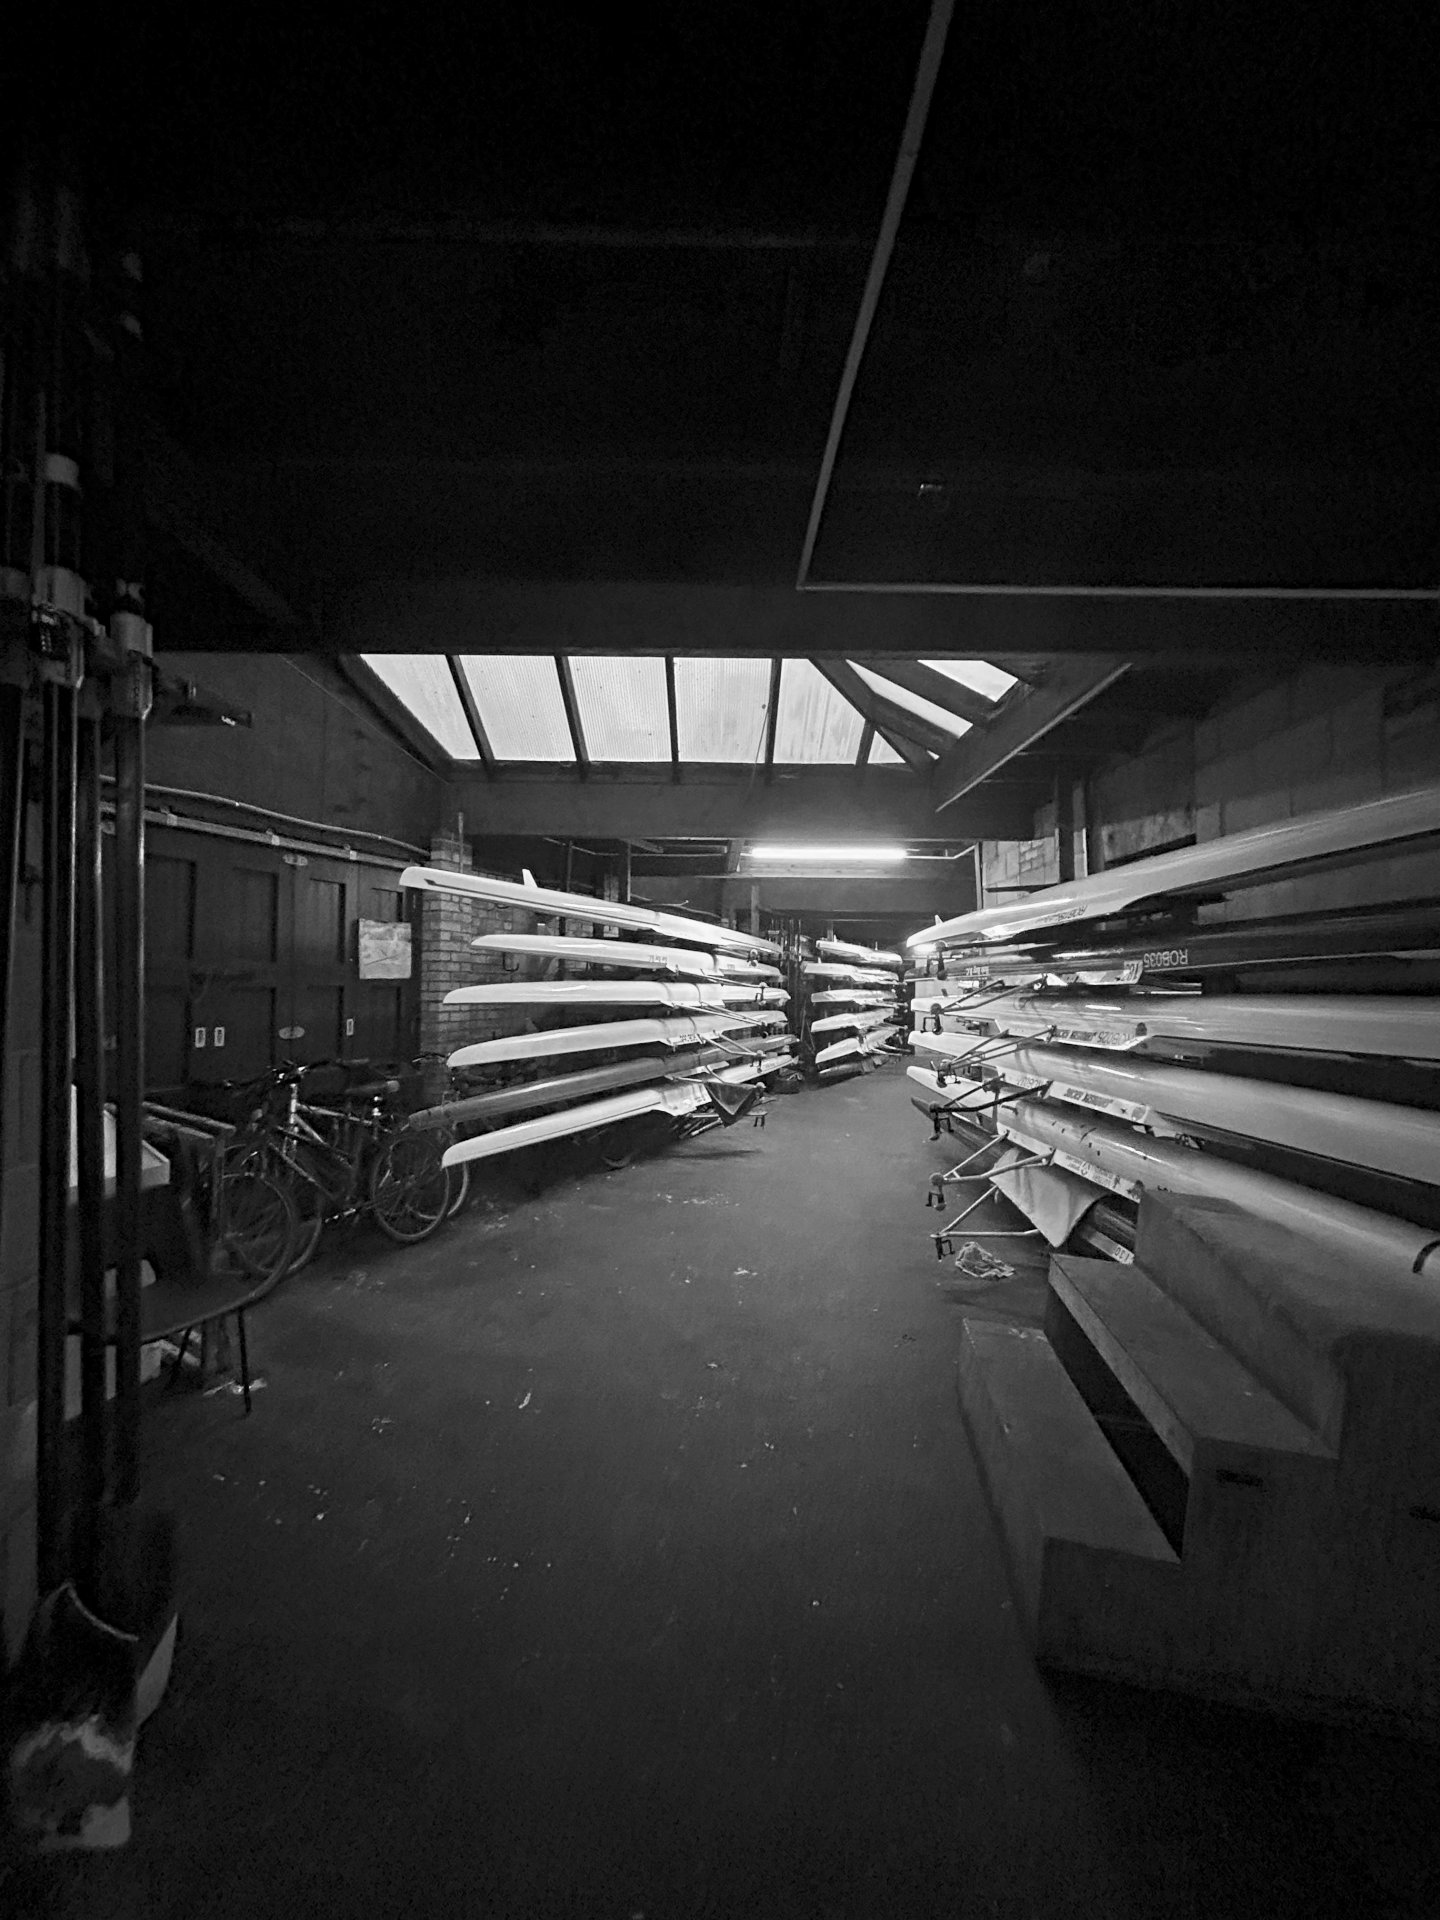 Black-and-white photo of canoes and cycles in shed